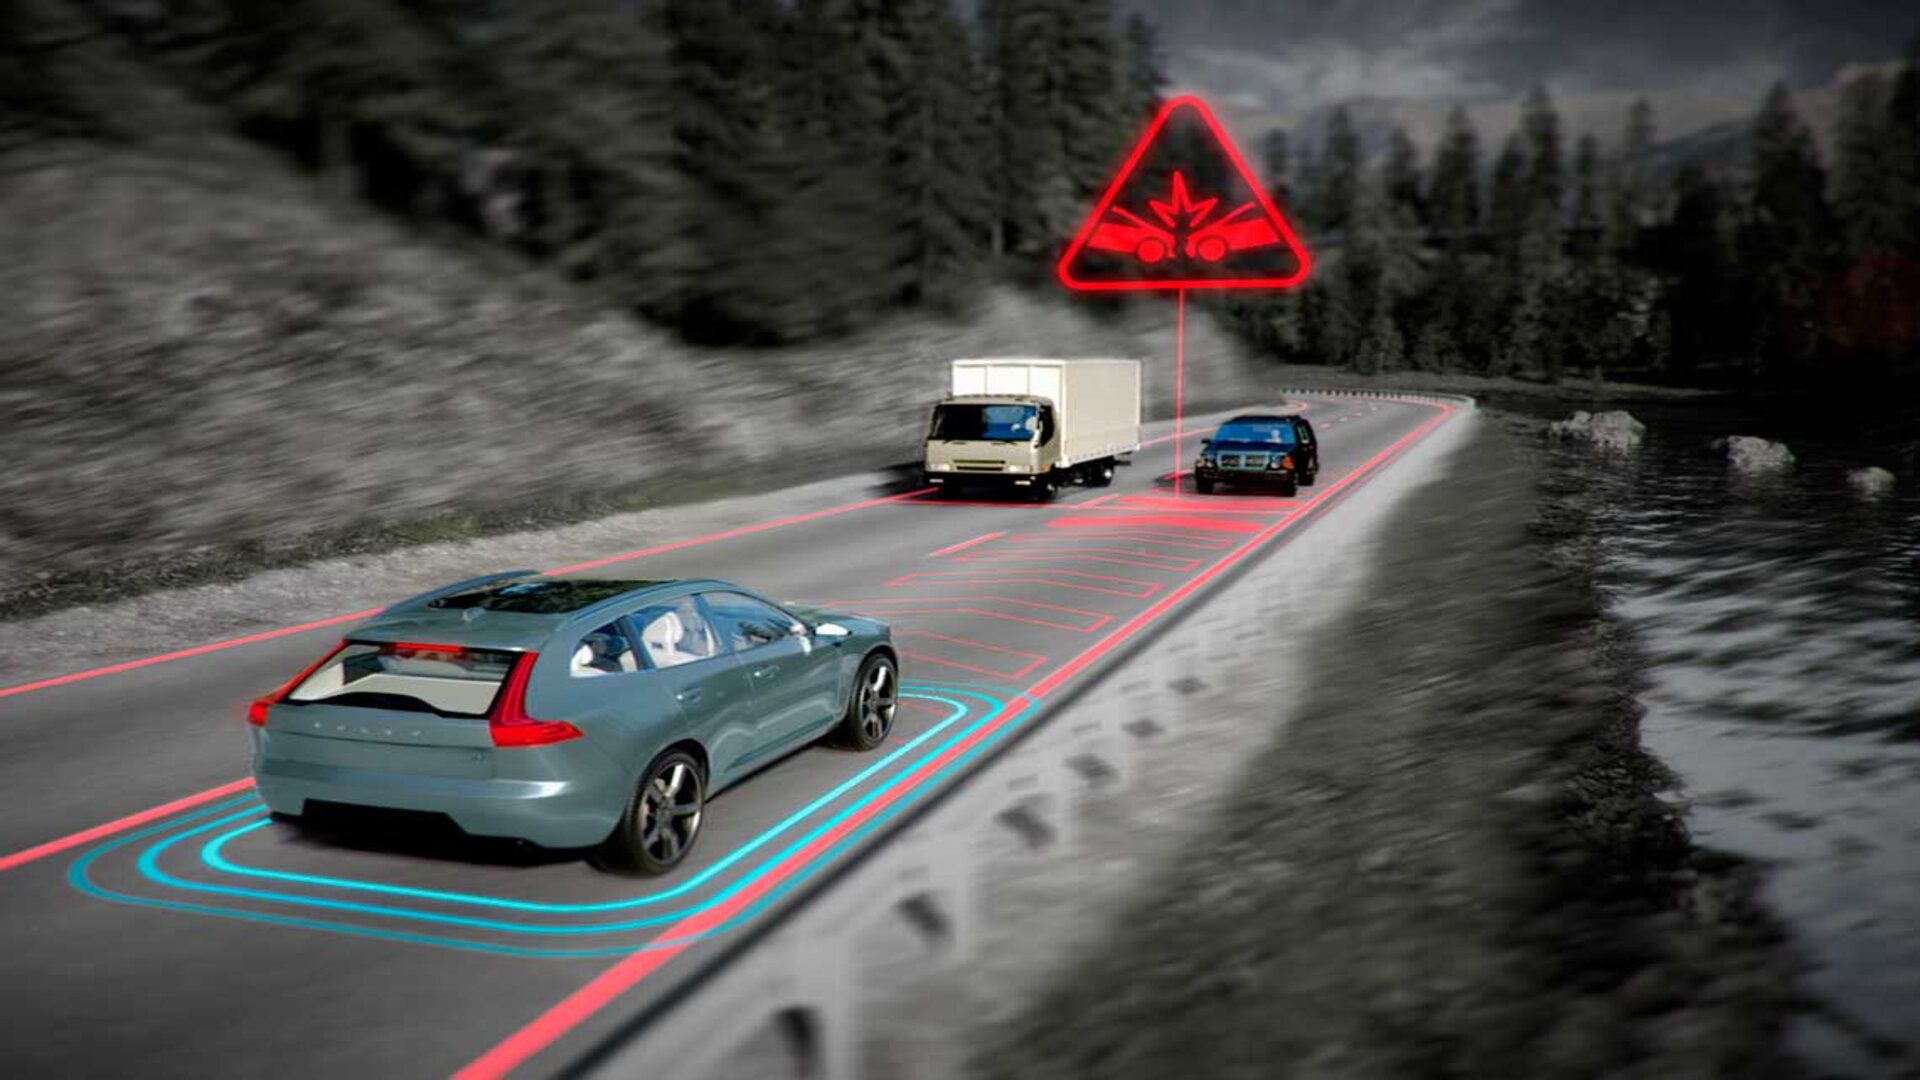 How Volvo’s Oncoming mitigation by braking system works